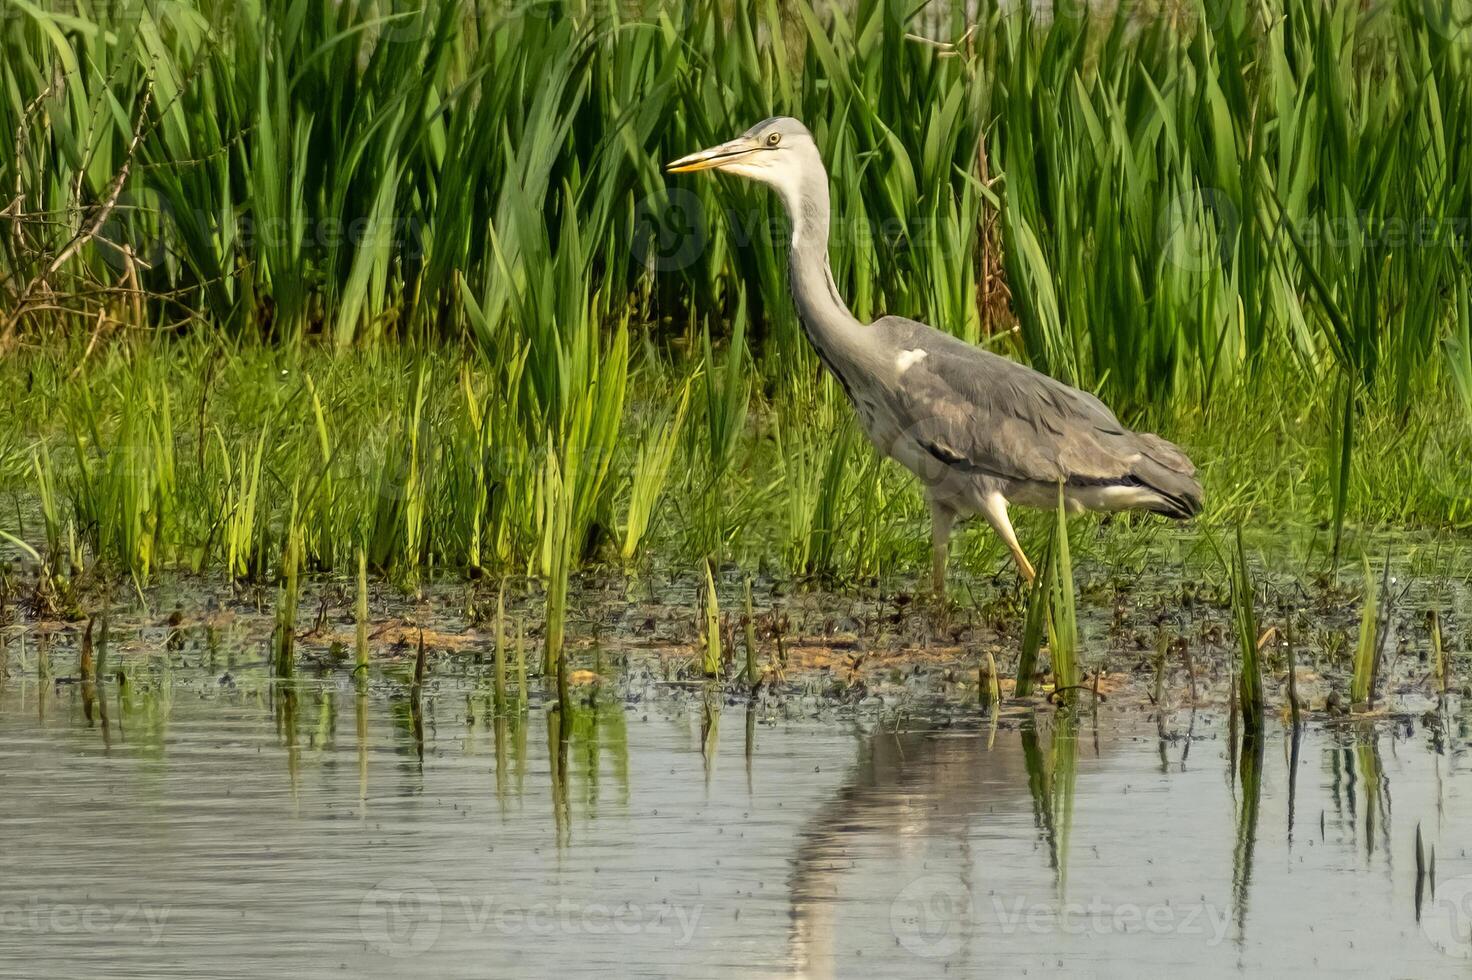 a gray heron in search of food photo